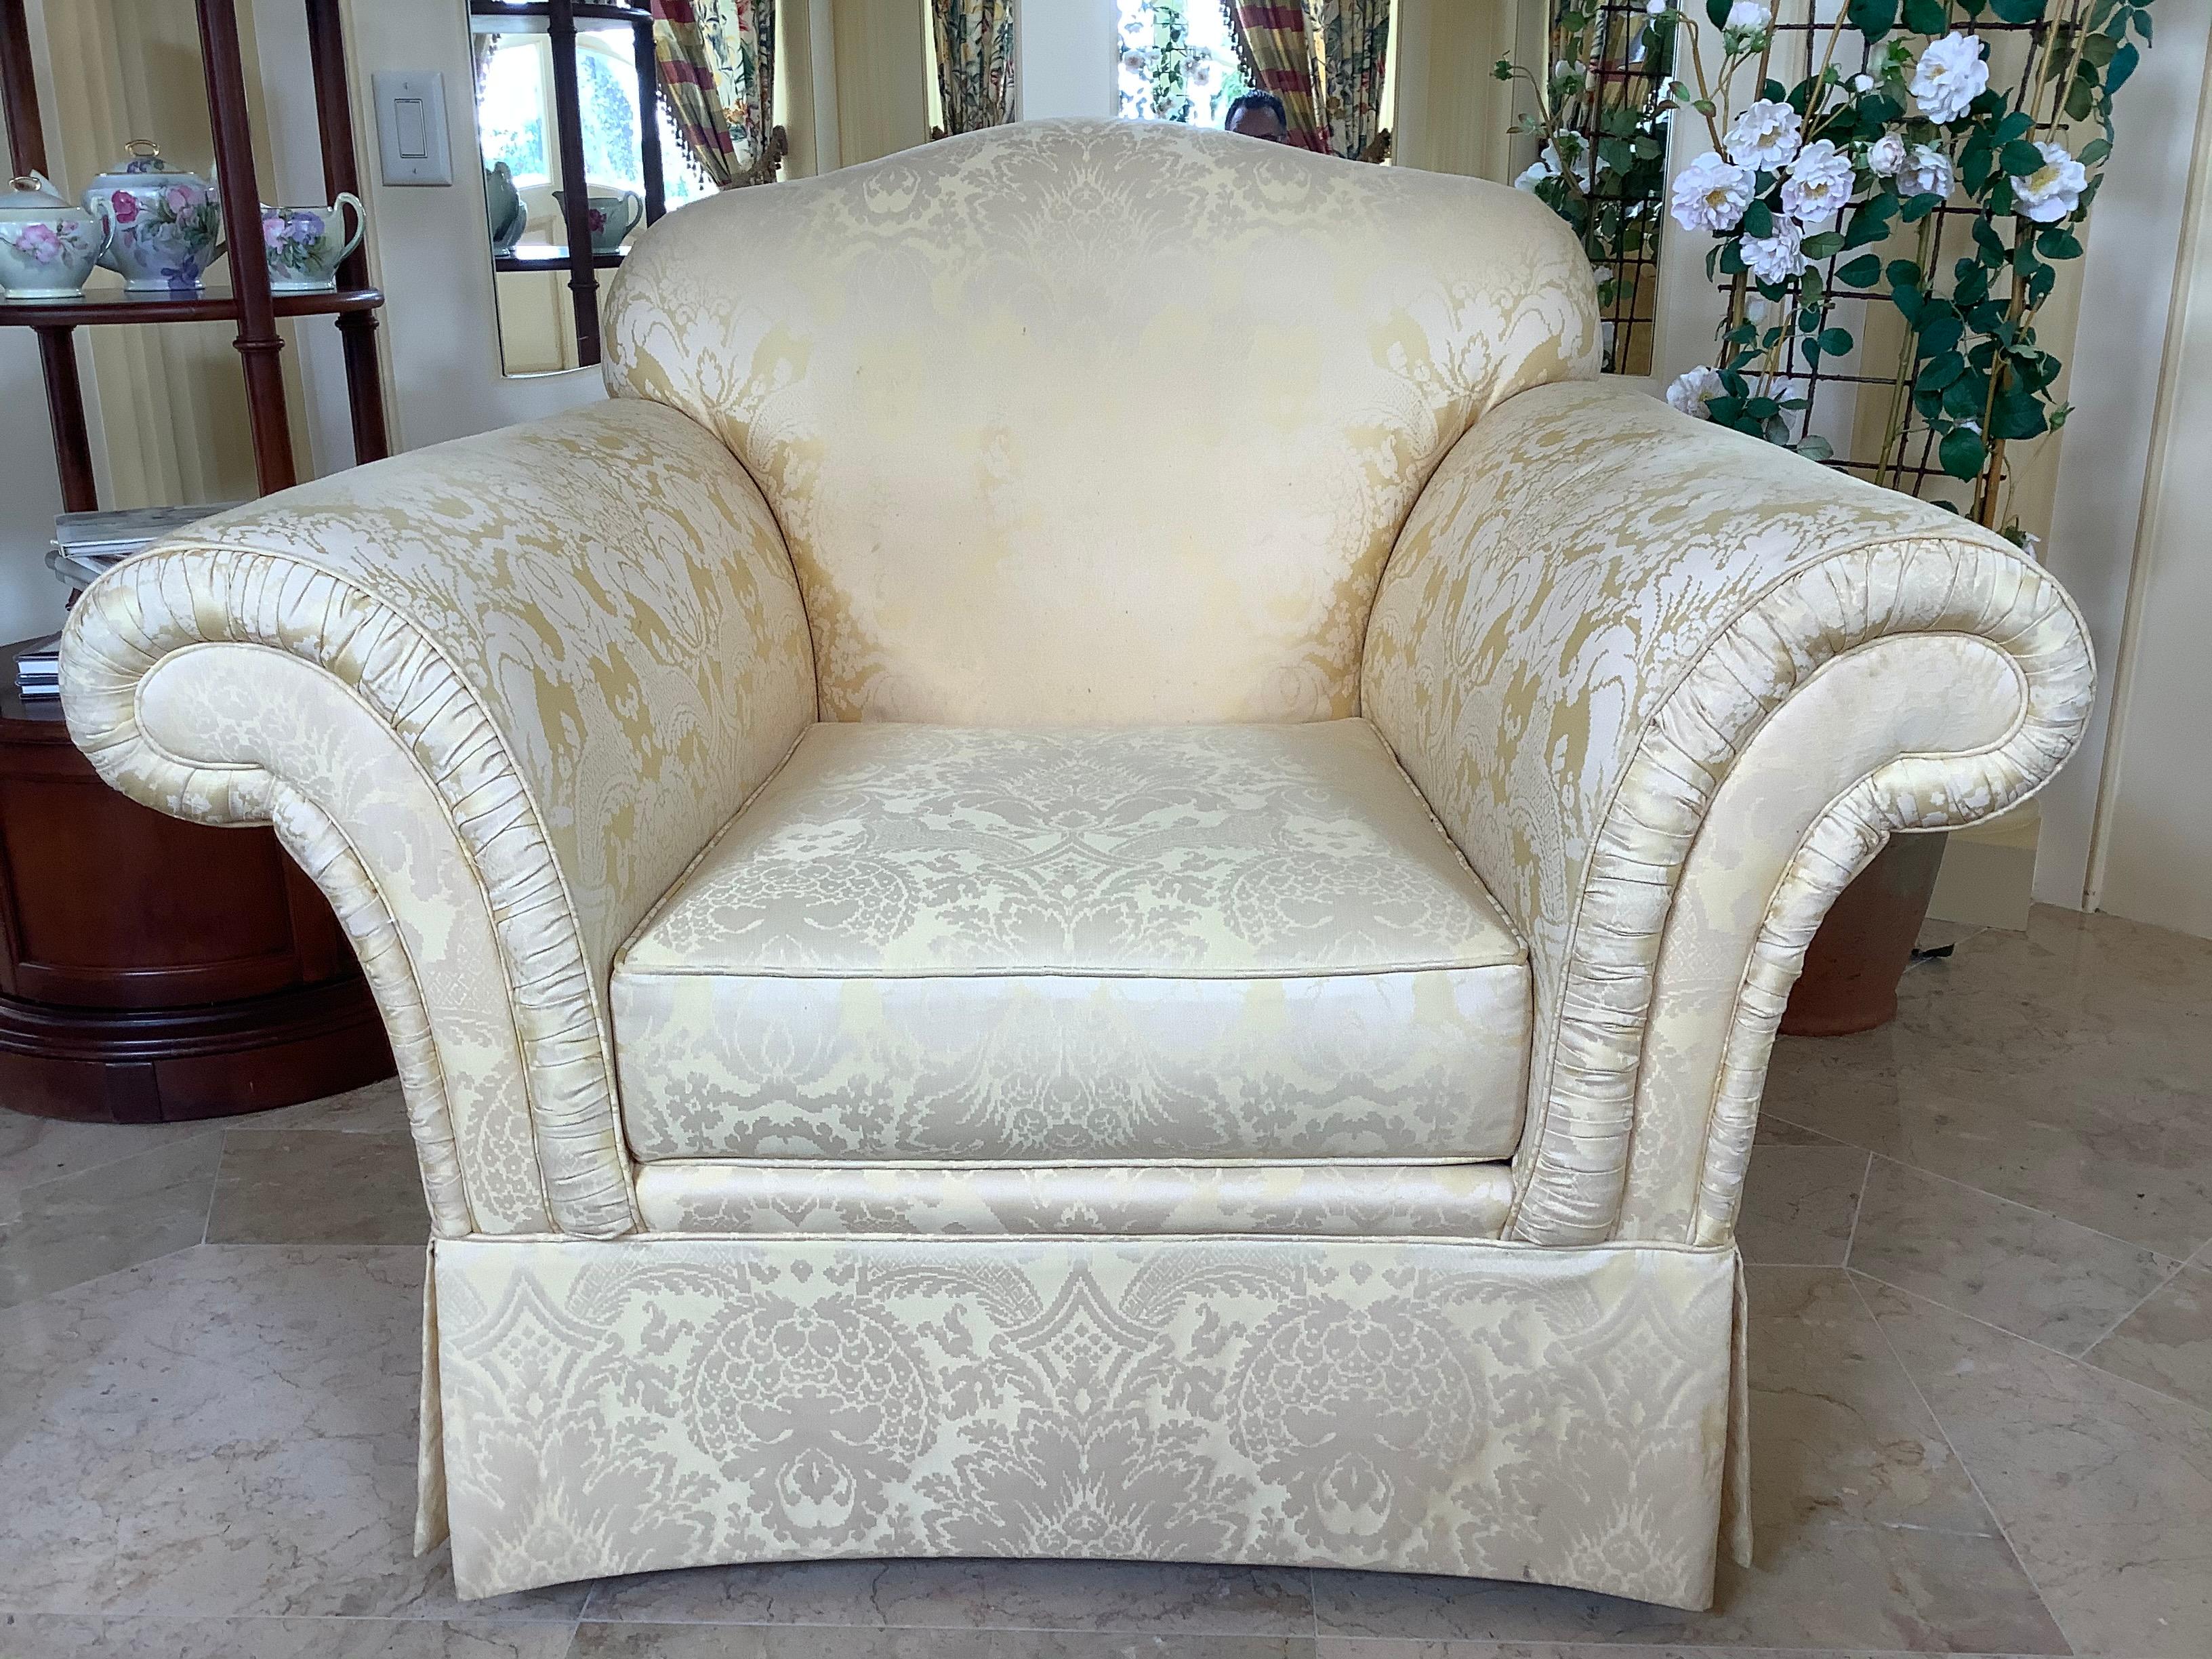 Upholstery Upholstered Club Chair in a Yellow Damask Fabric, 20th Century